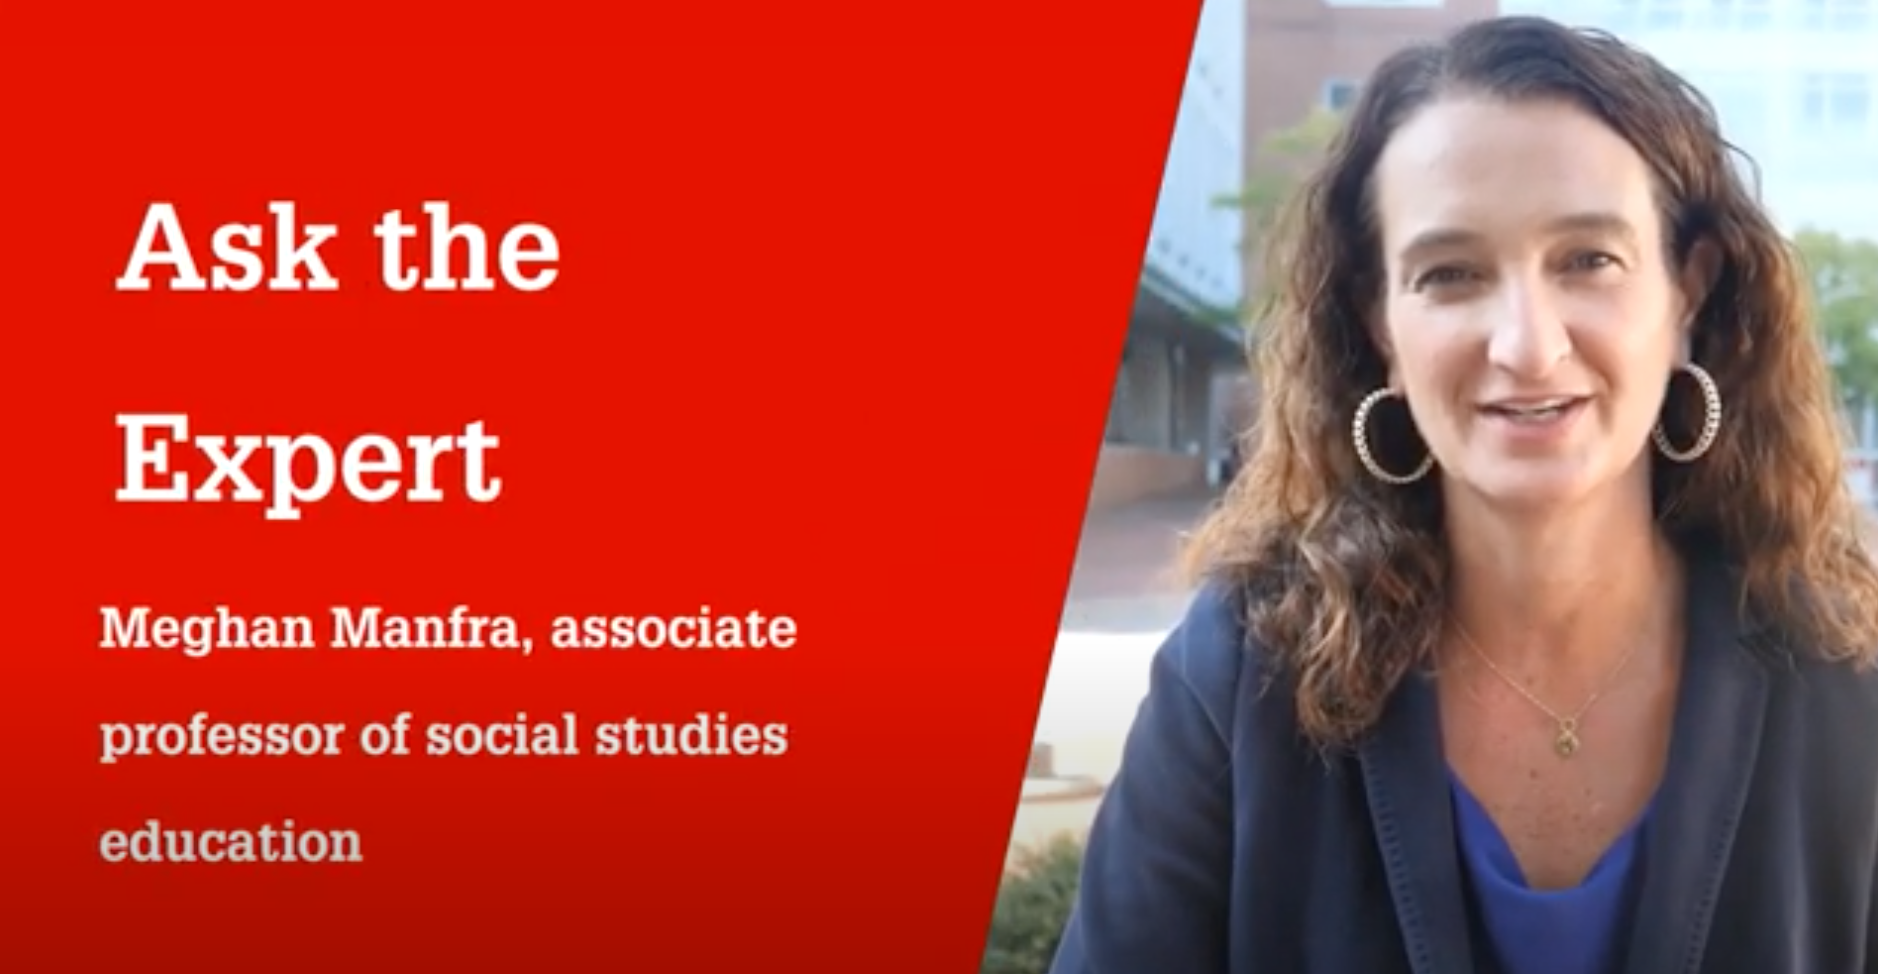 What is social studies? NC State College of Education Associate Professor Meghan Manfra answers the question